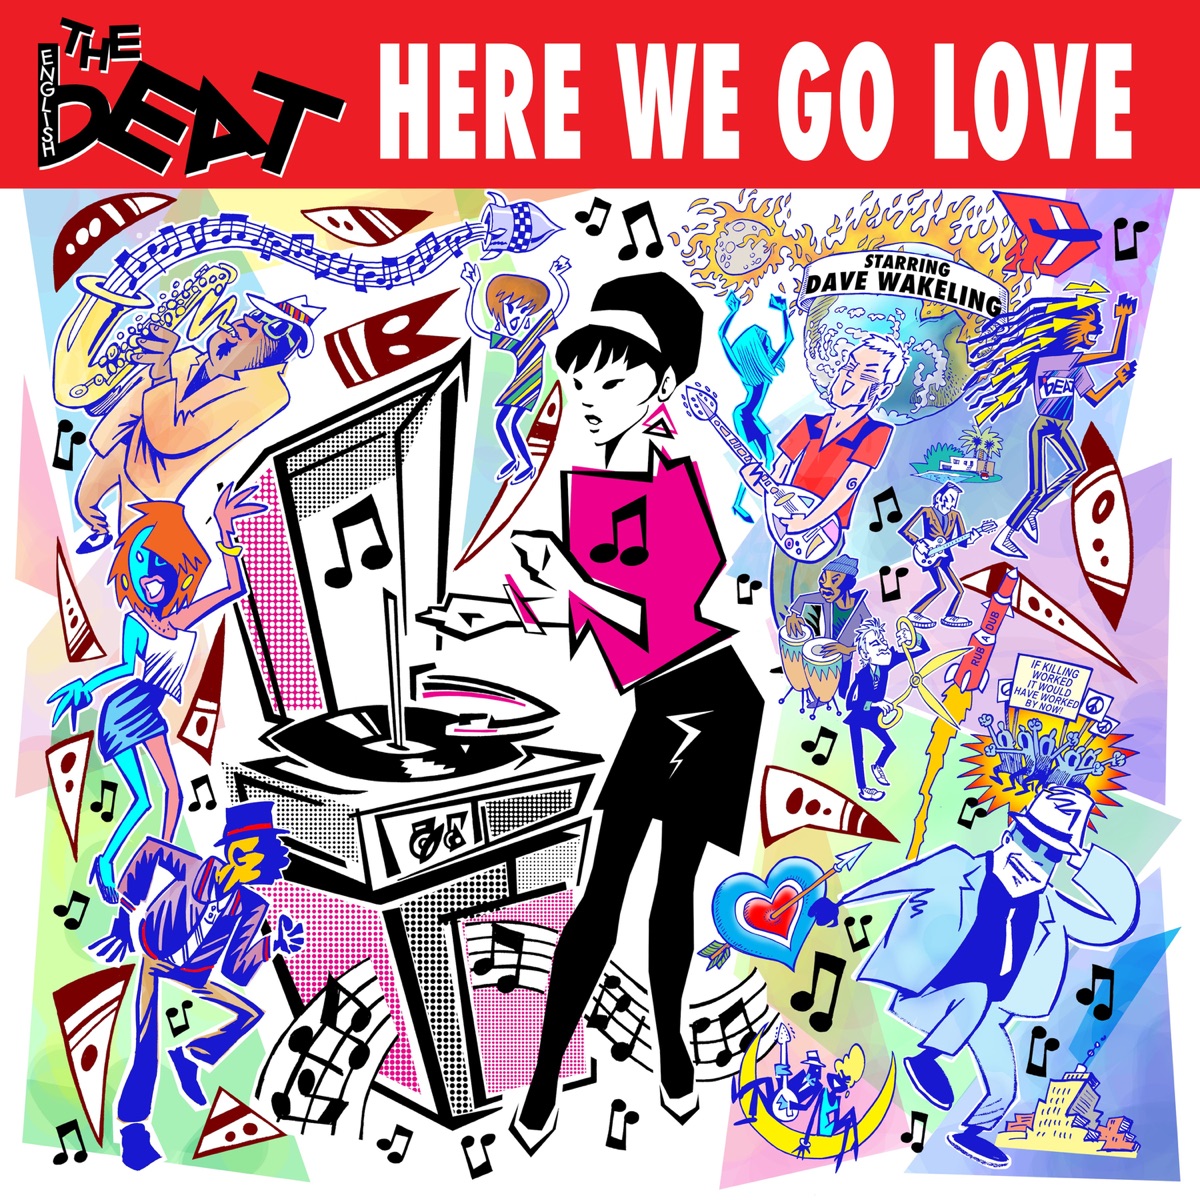 I Just Can't Stop It (Remastered) - Album by The English Beat - Apple Music